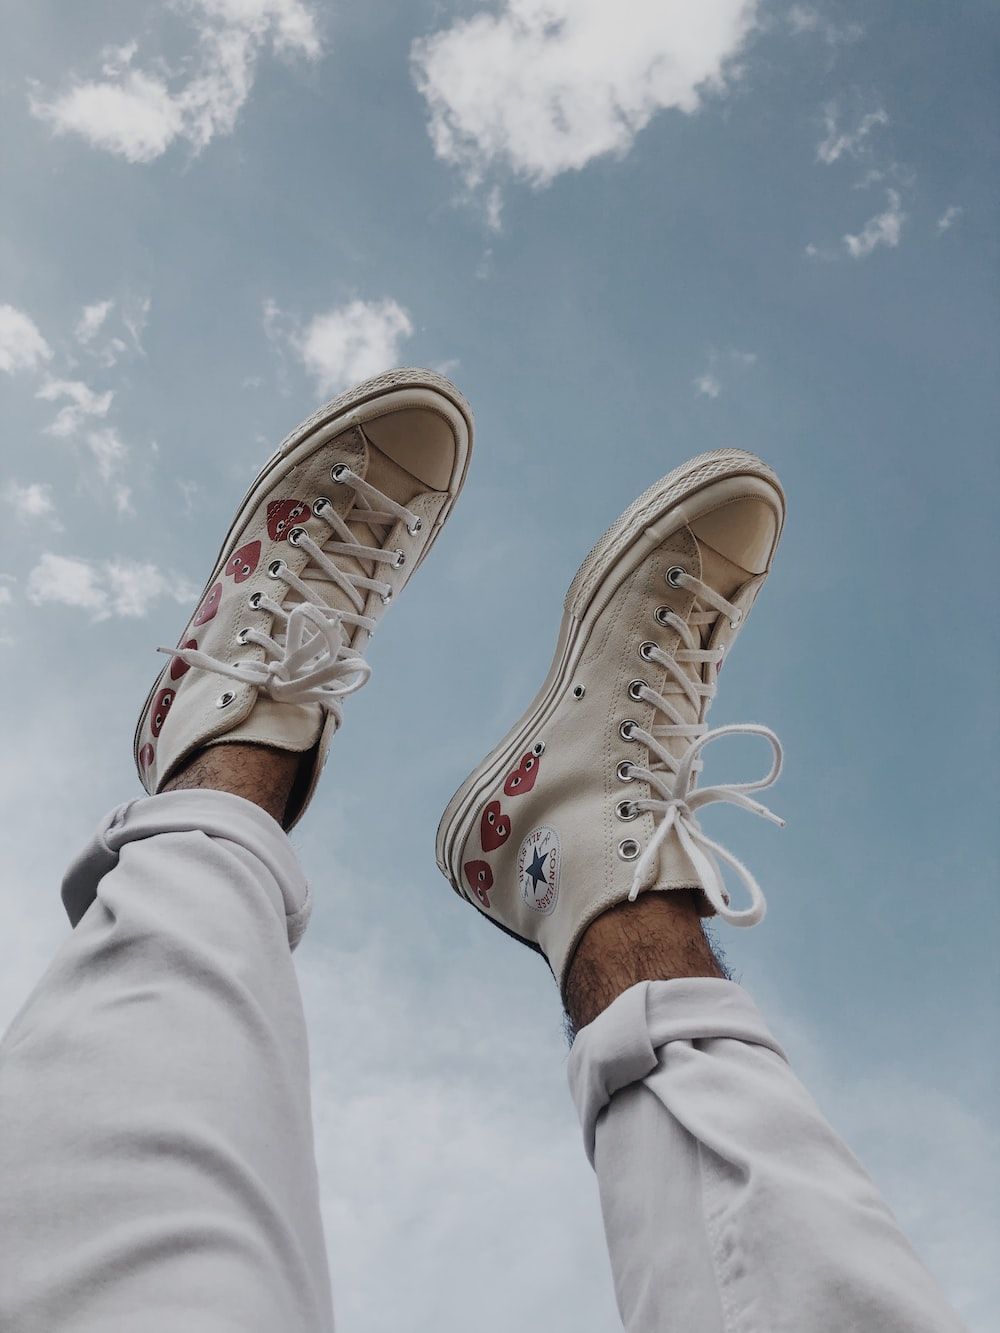 A person wearing white Converse sneakers with red and blue hearts on it. - Converse, shoes, sky